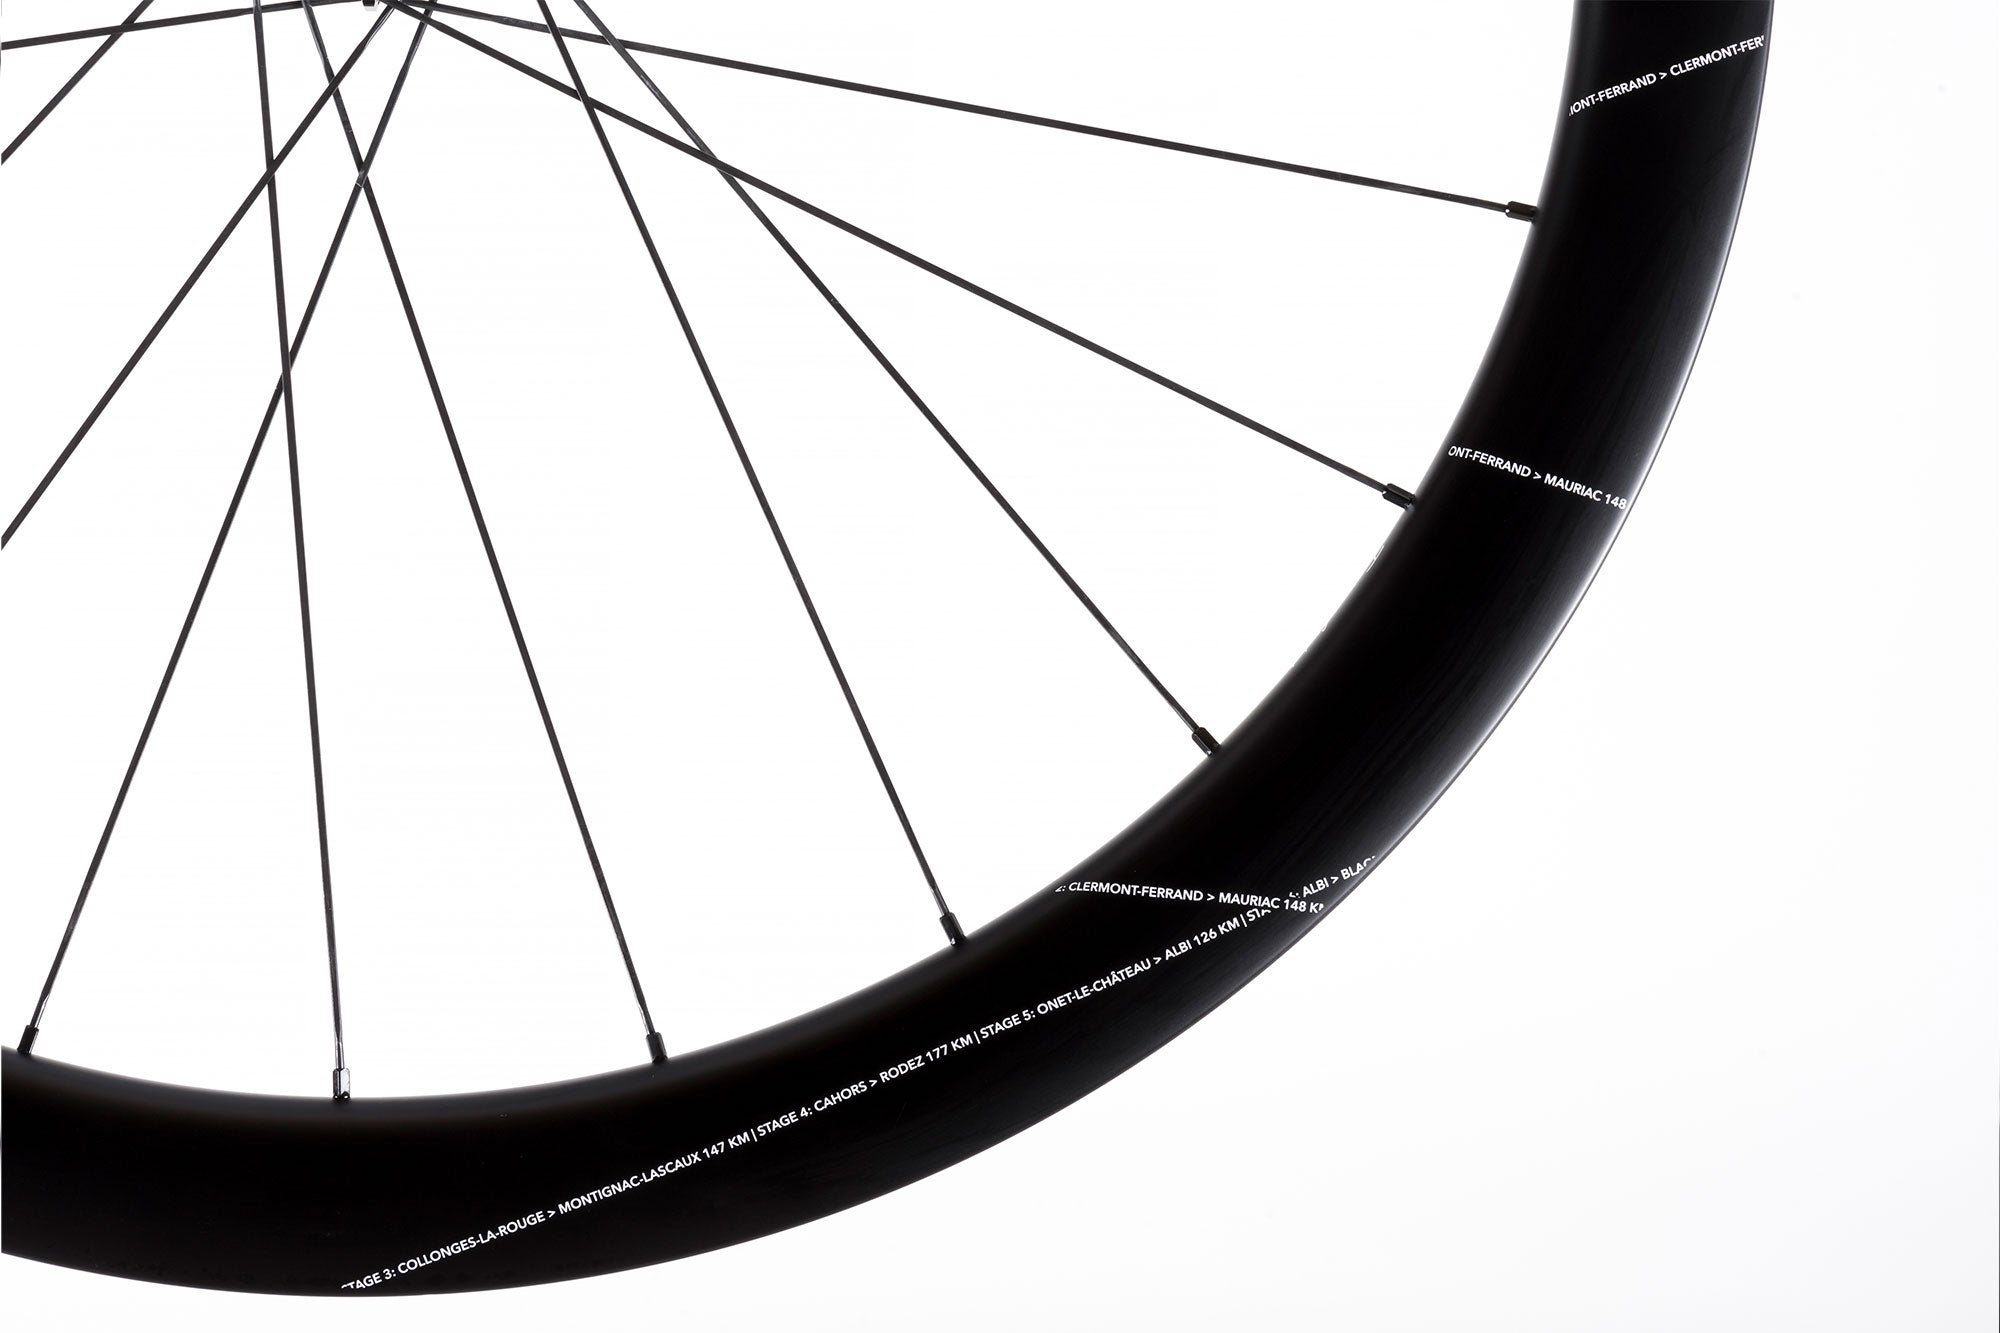 <h1>Limited-Edition Graphics</h1><i>Celebrating the Team Coop-Hitec Products achievements of being selected for the 2023 edition of the Tour de France Femme avec Zwift, the team at HUNT have built a limited-edition version of the 44 Aerodynamicist Carbon Disc. These wheels feature graphic callouts of the start and end points of each stage of the Tour de France Femme avec Zwift. </i>